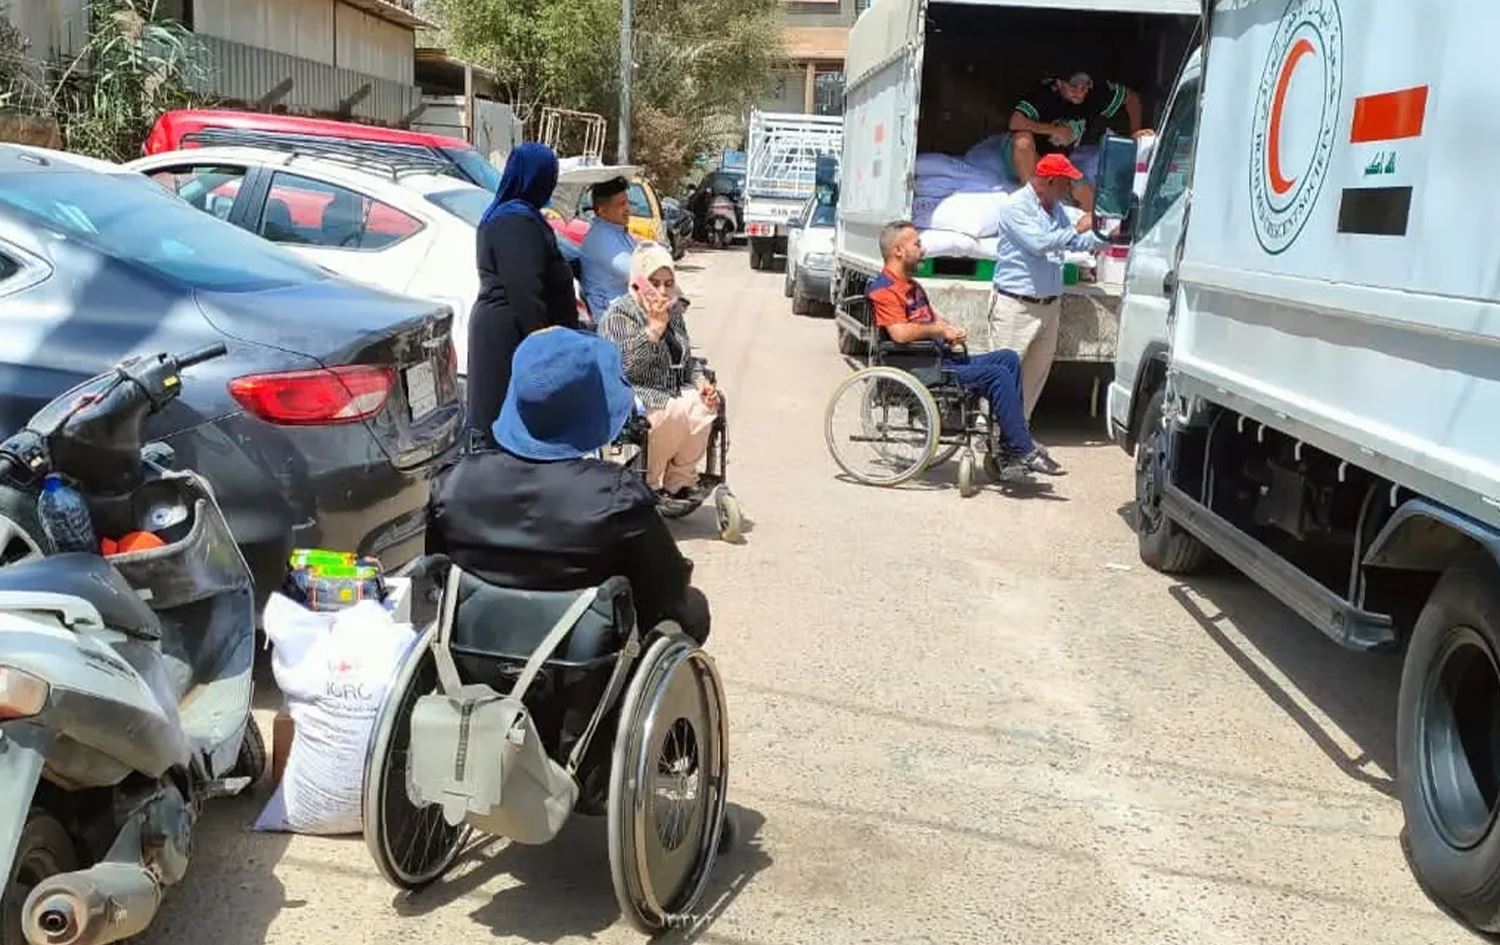 Iraq fails to implement disability employment laws - HRW